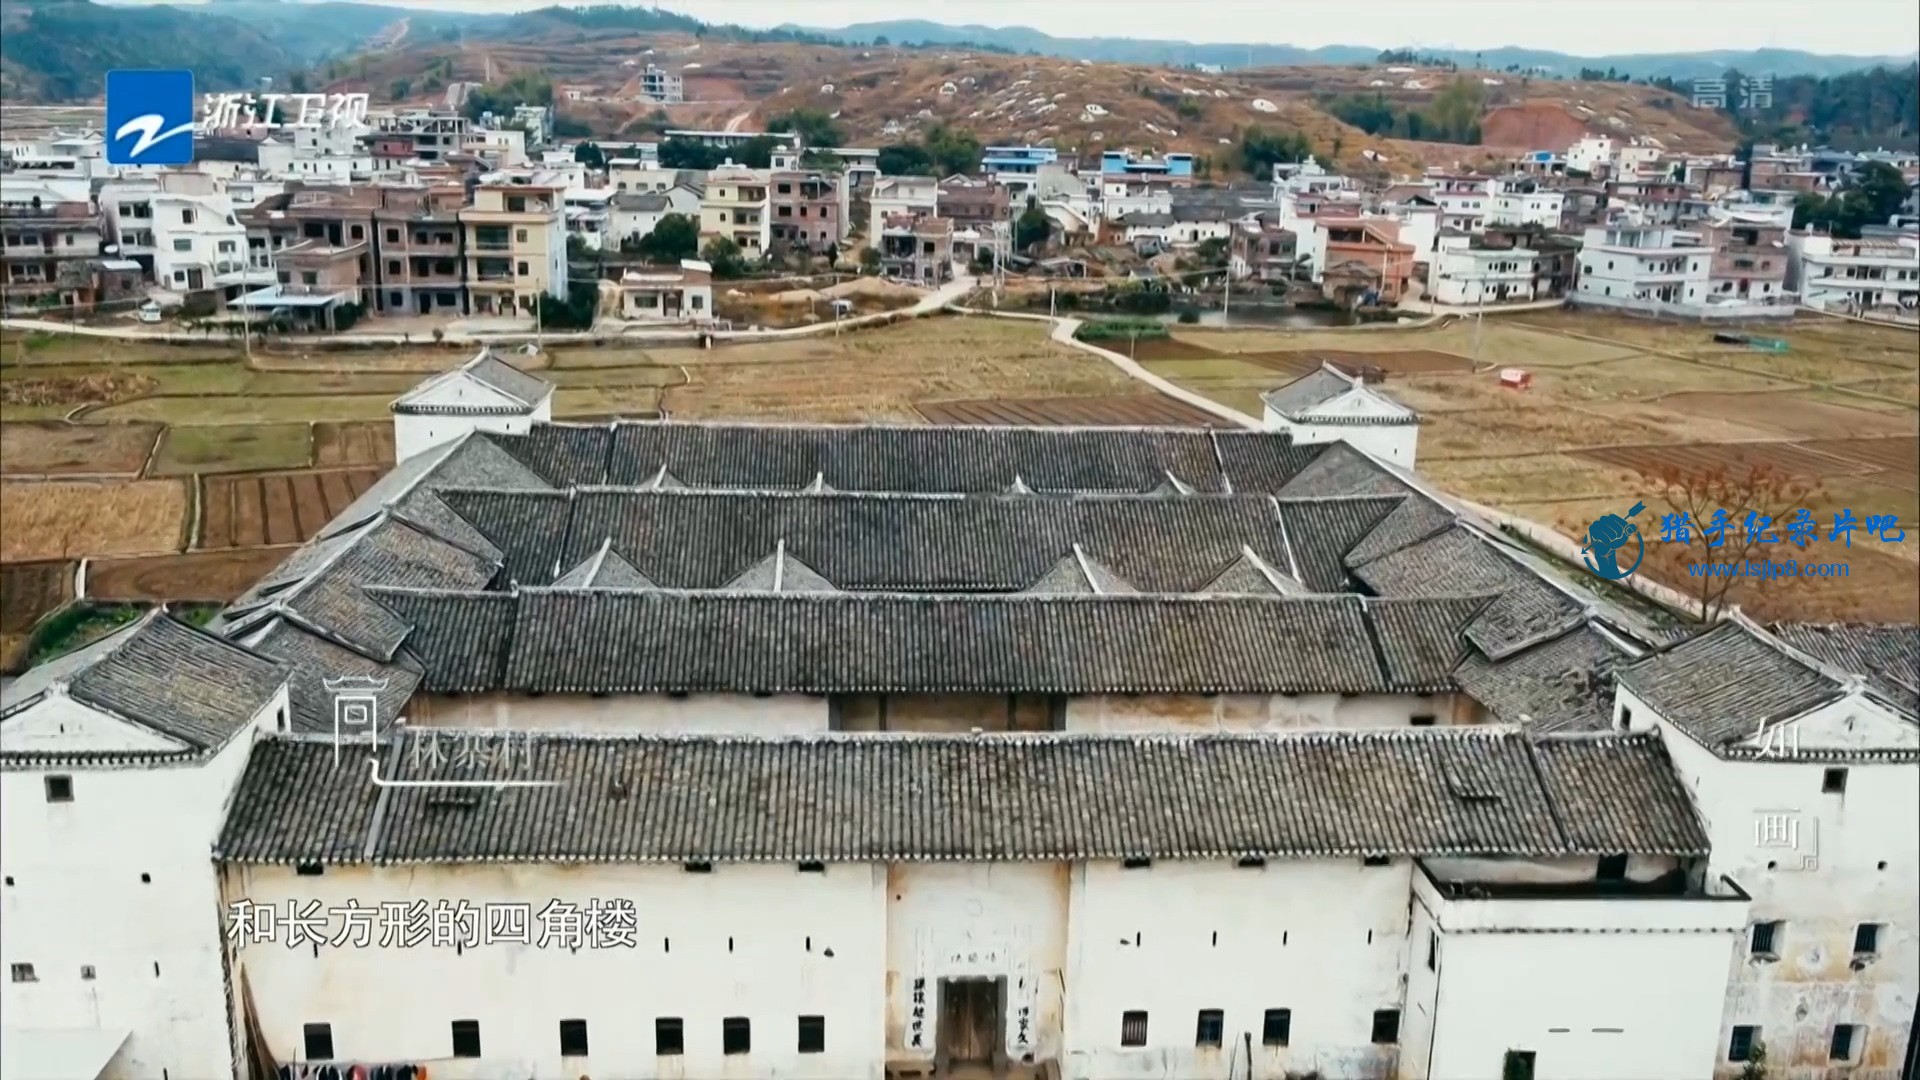 ZJTV-HD,Villages.in.China.EP01.HDTV.1080i.H264.AAC.ts_20190920_082247.426.jpg